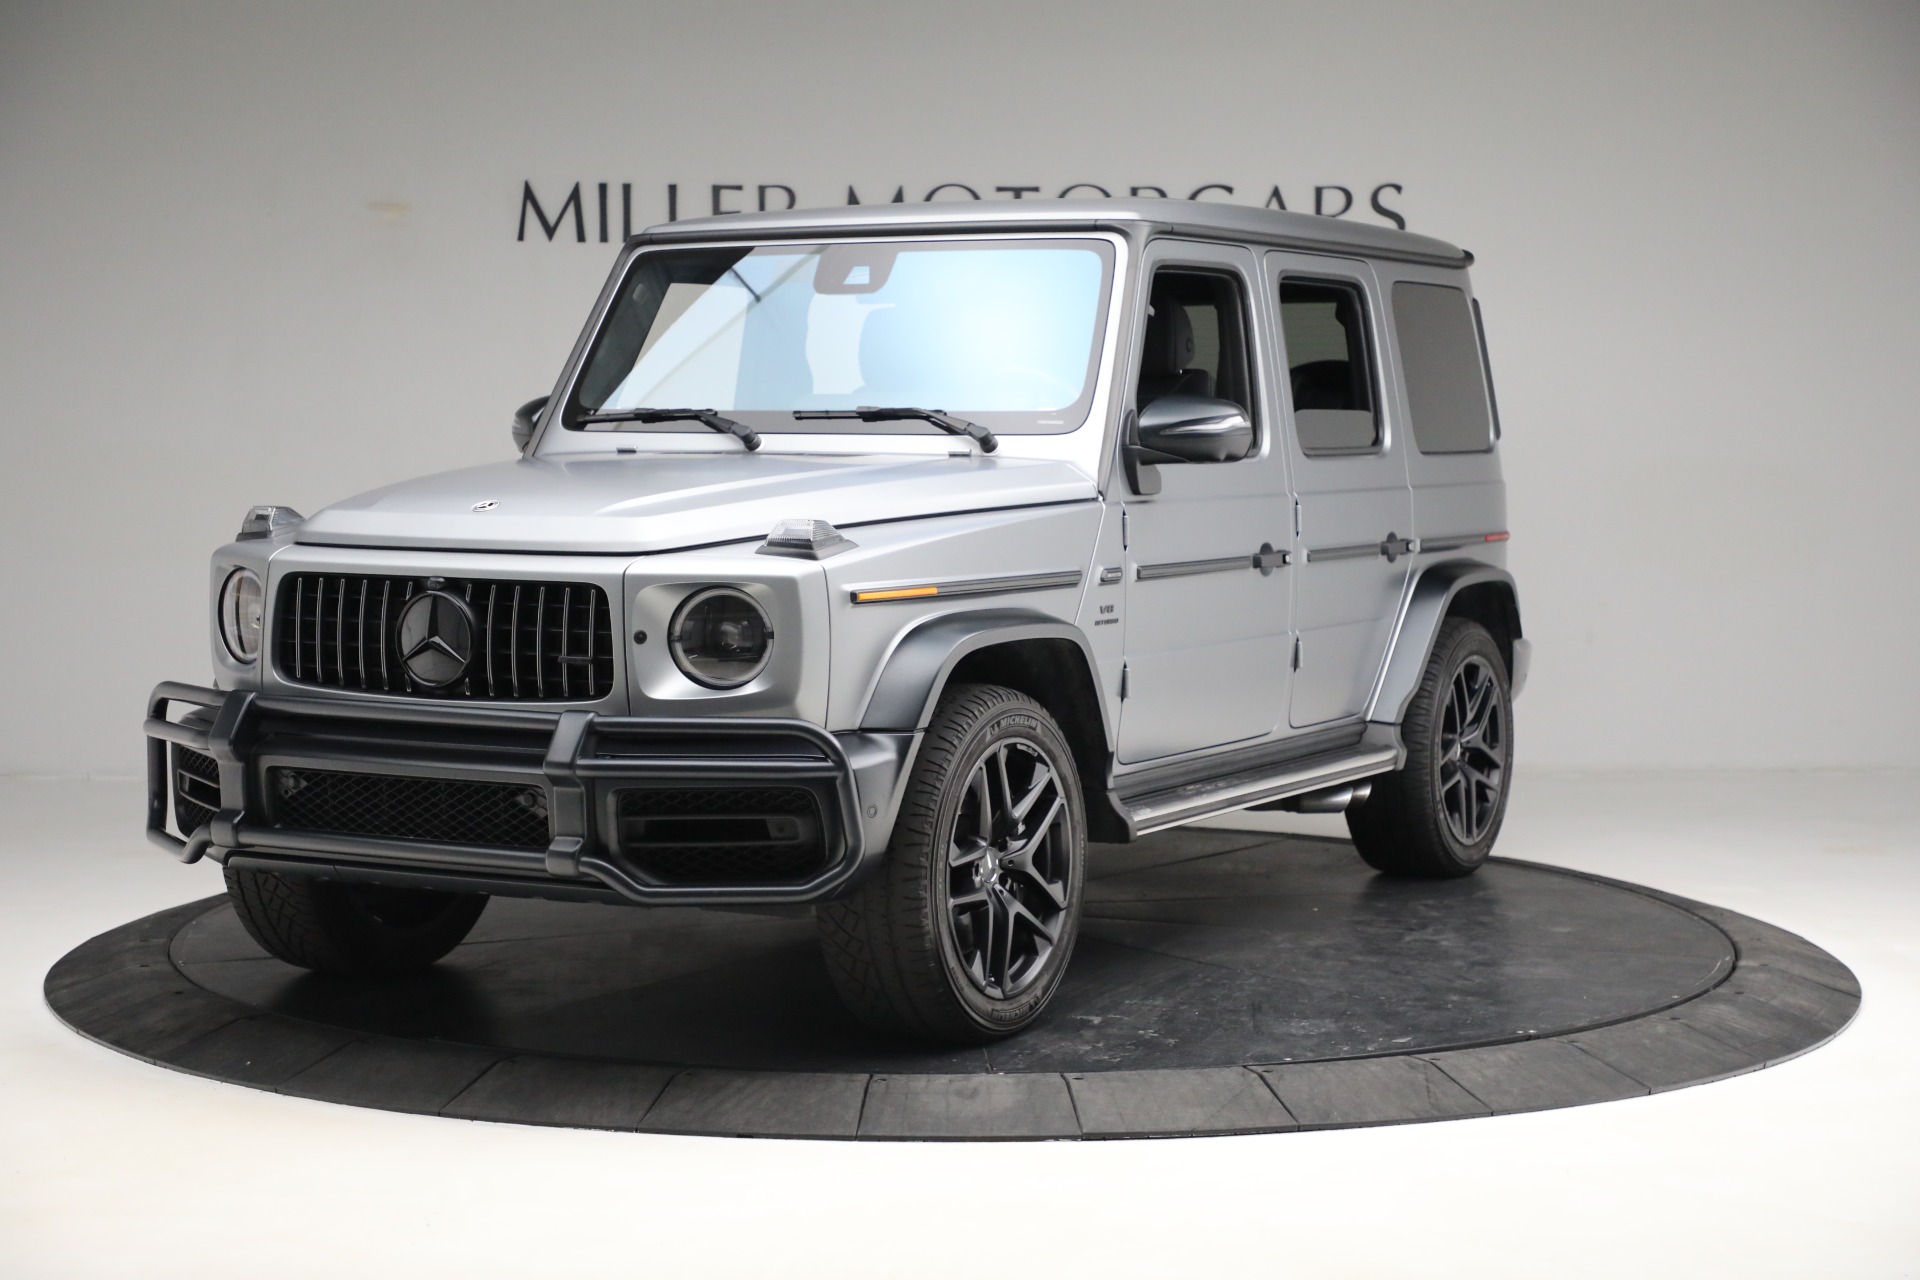 Used 2021 Mercedes-Benz G-Class AMG G 63 for sale $182,900 at Alfa Romeo of Westport in Westport CT 06880 1